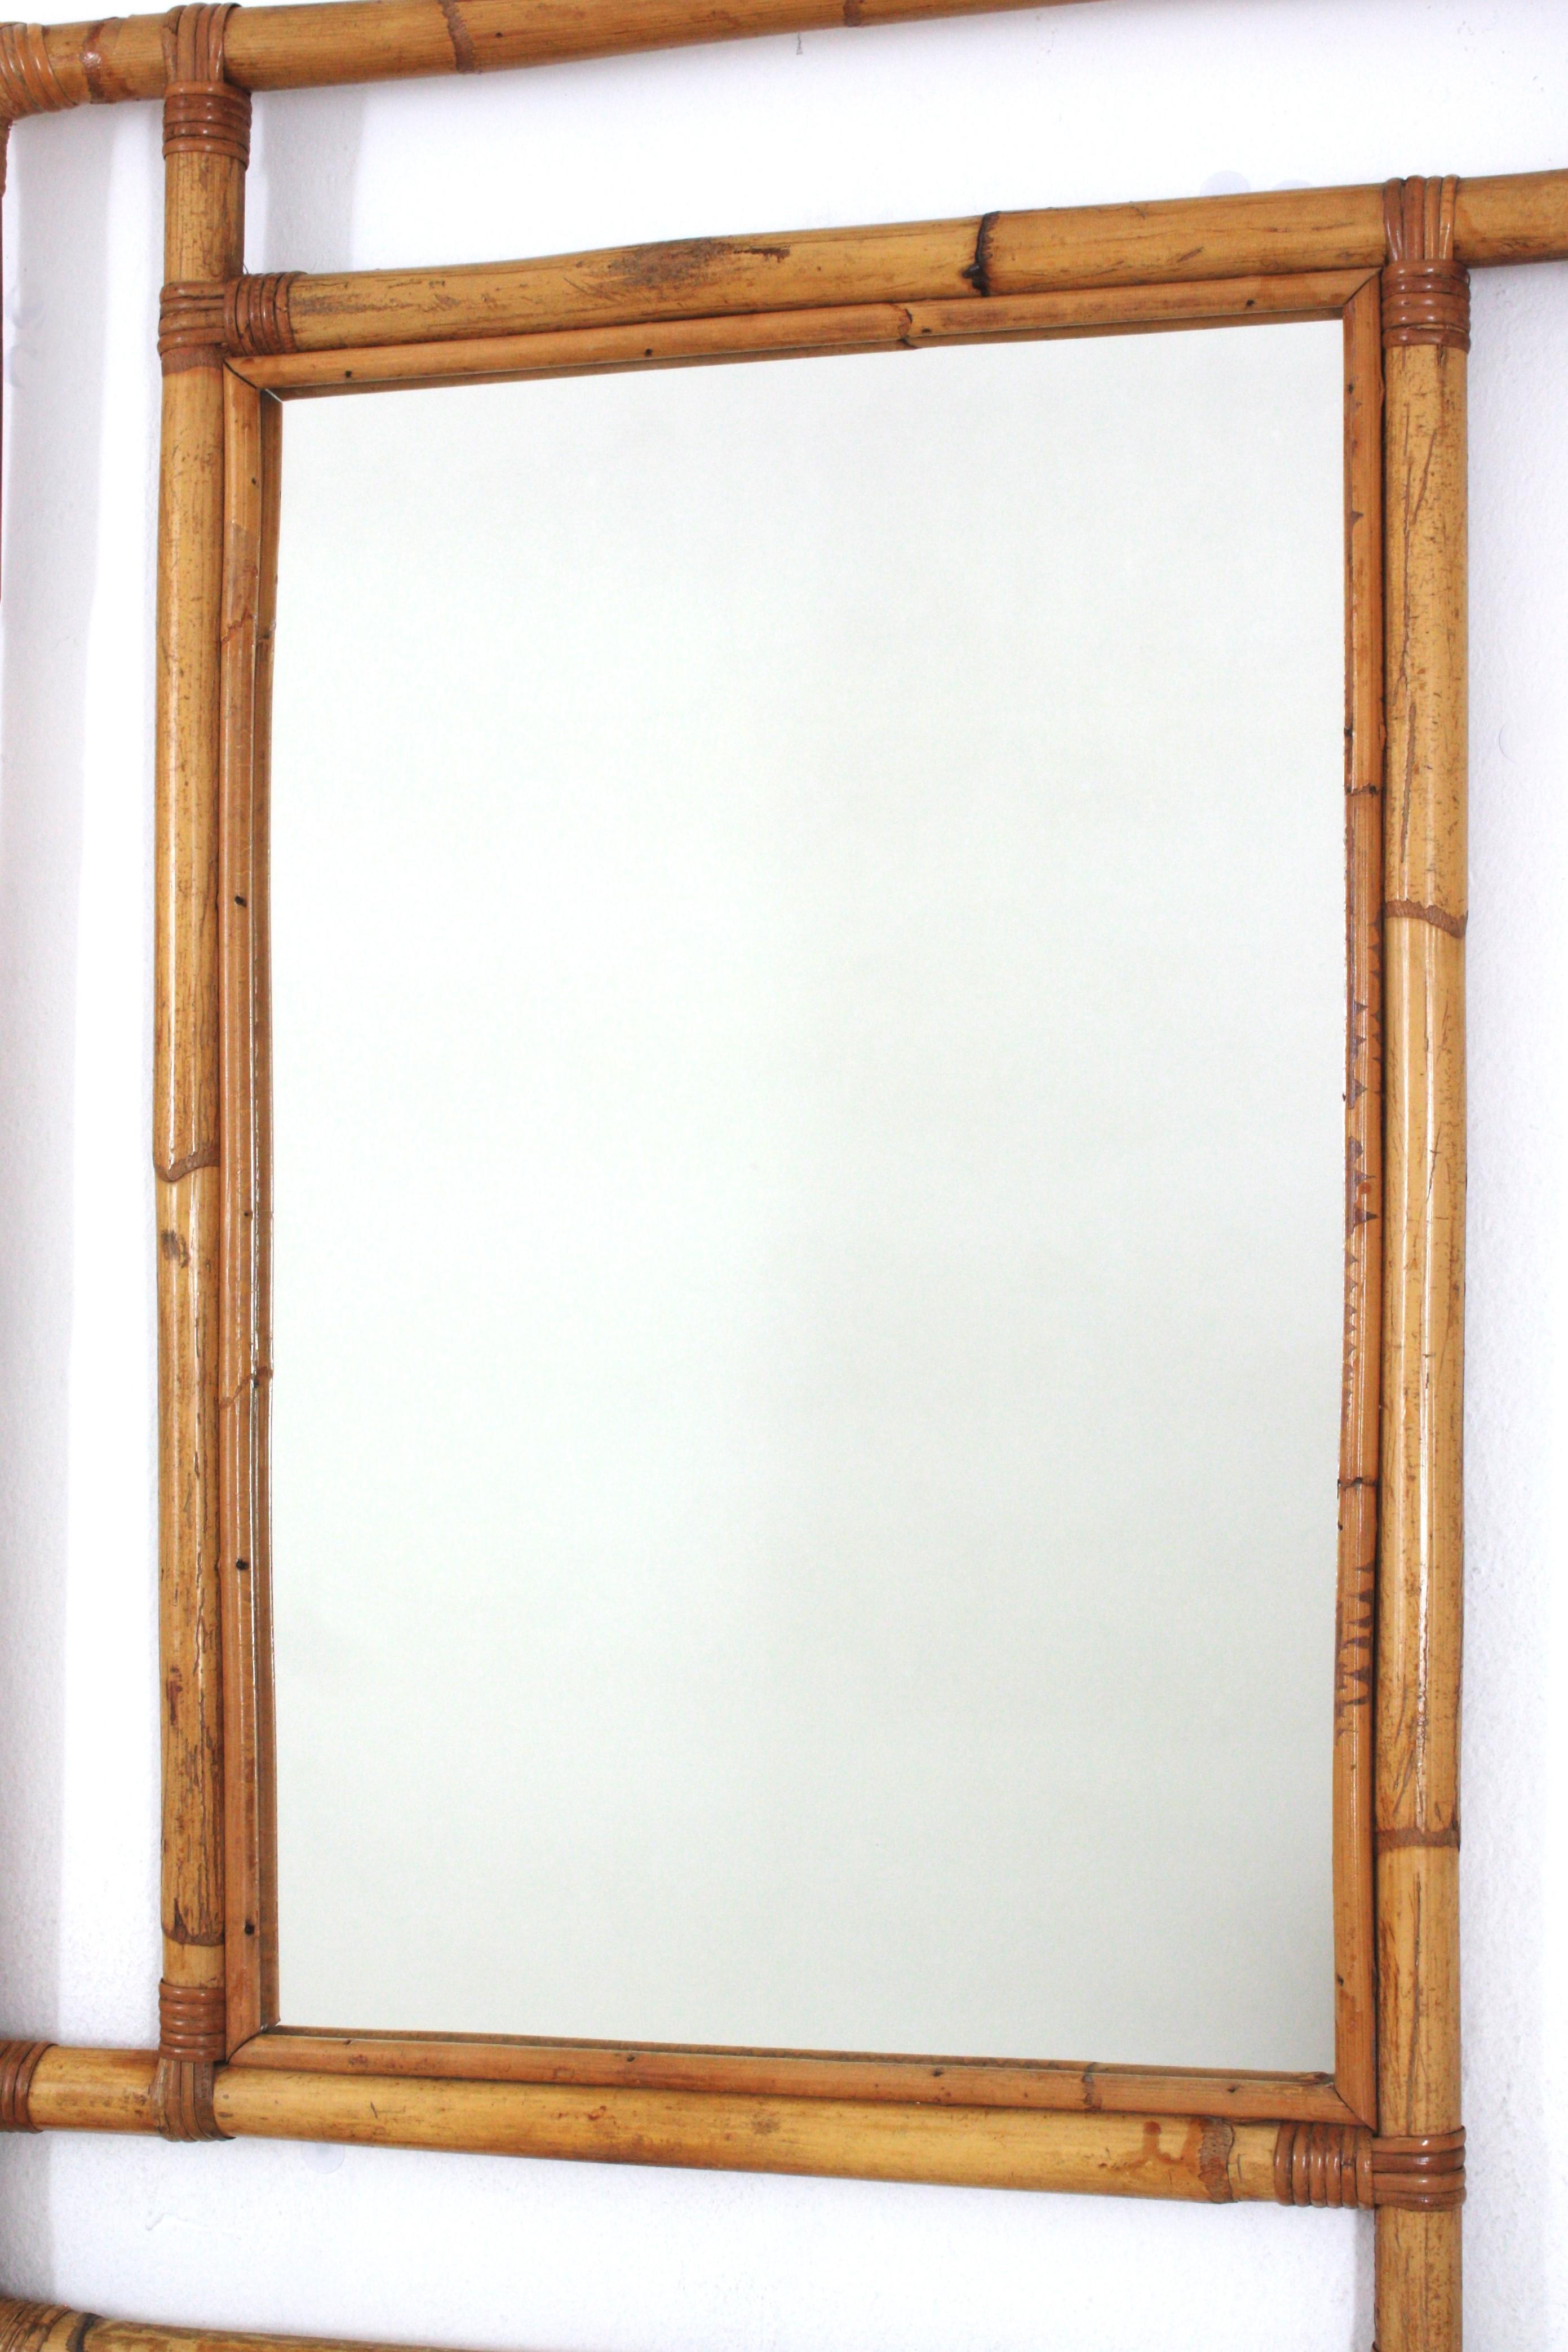 Bamboo Spanish Large Rattan Rectangular Mirror with Geometric Frame, 1960s For Sale